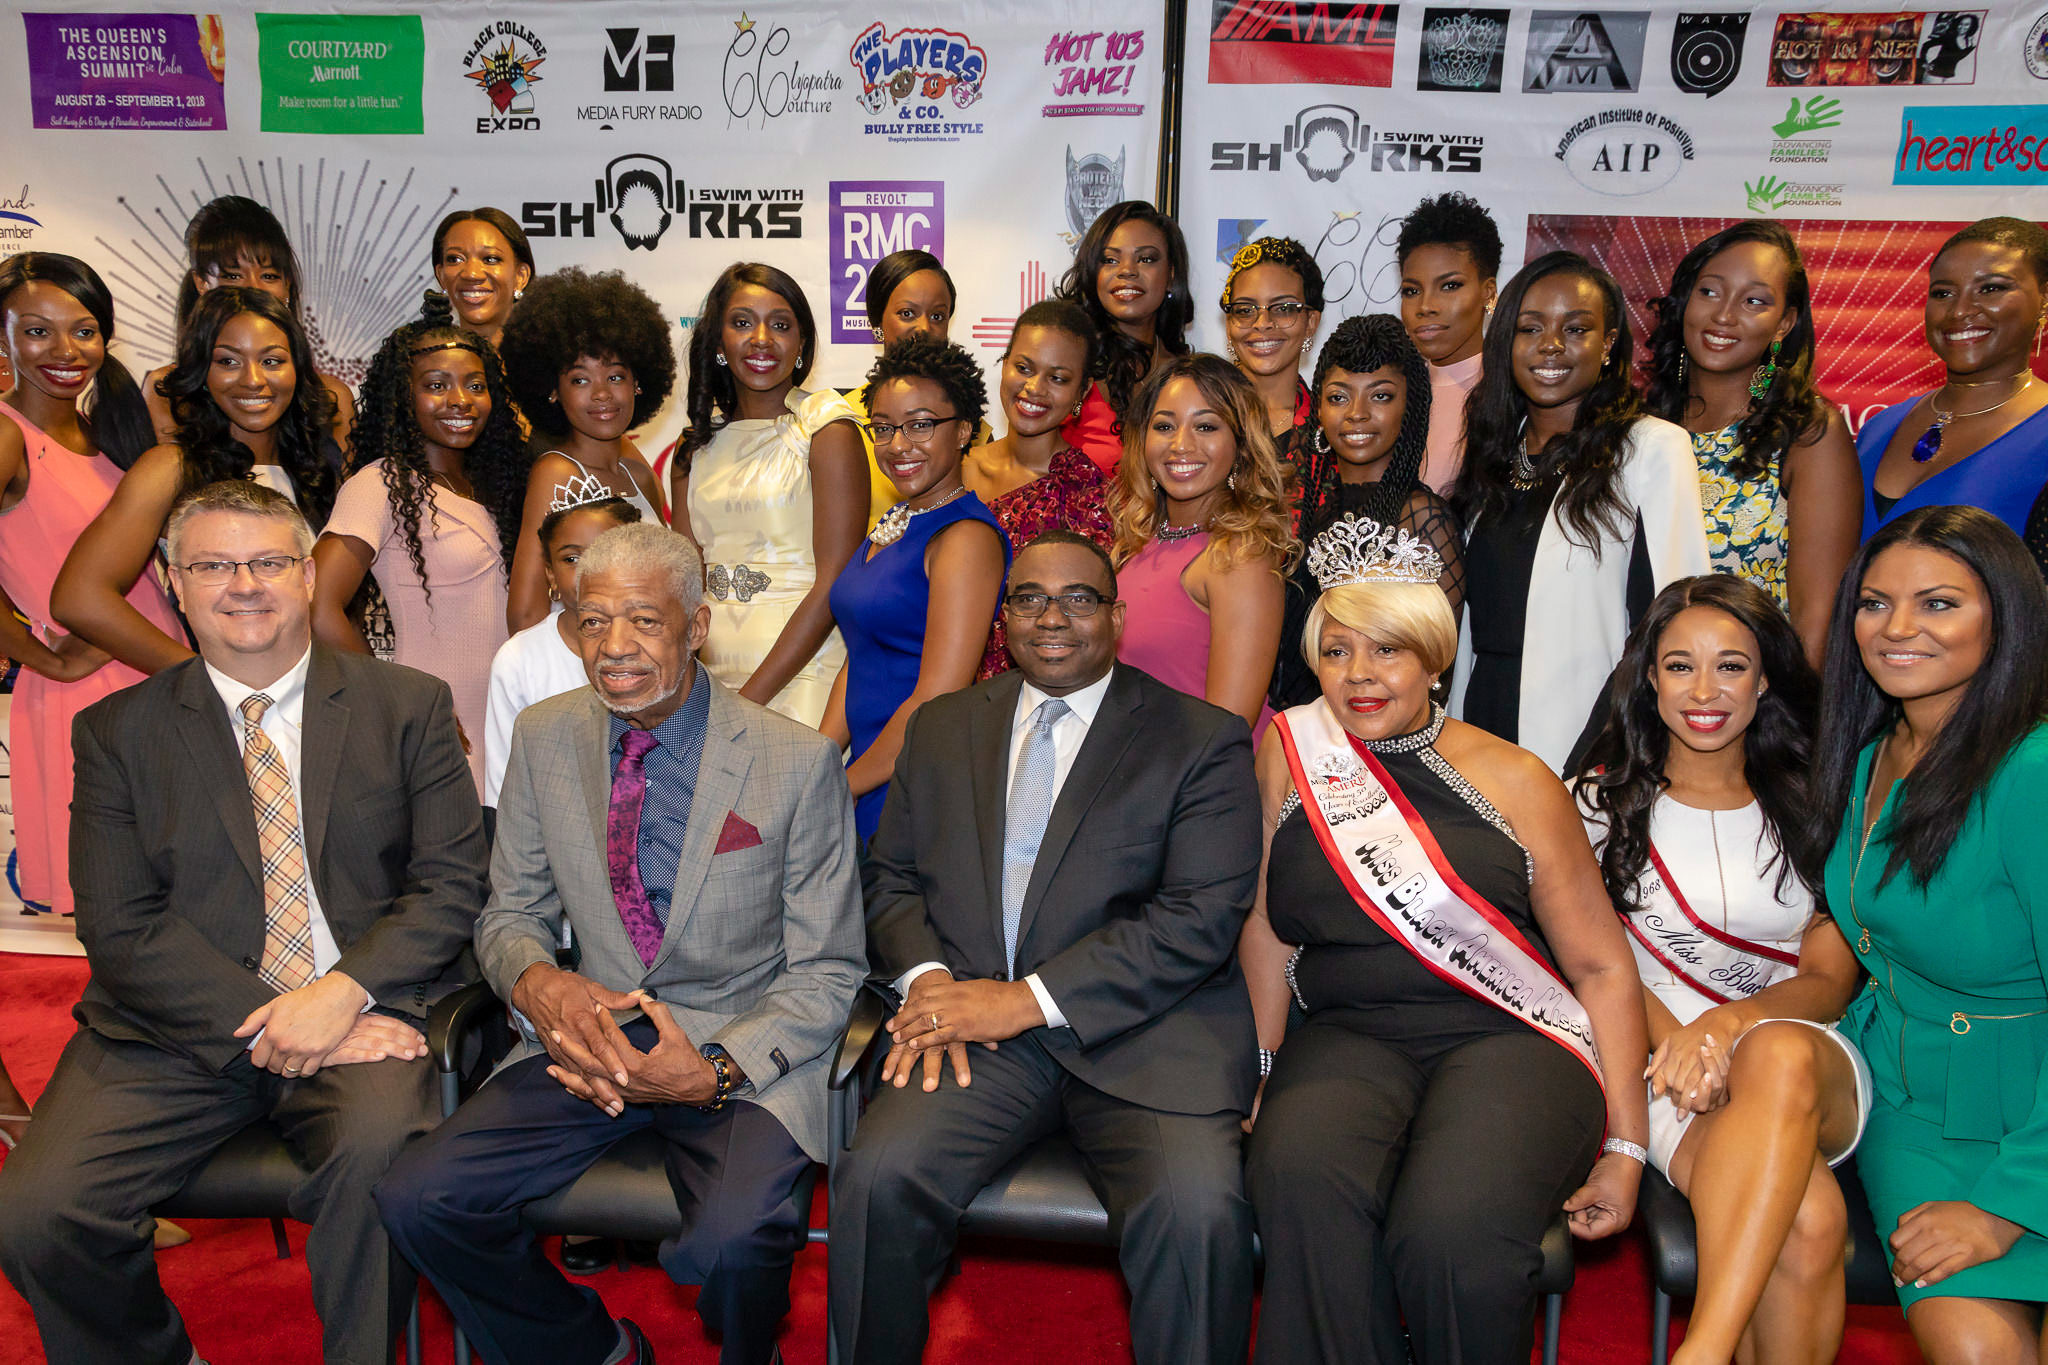 A photograph of dignitaries and pageant contestants.